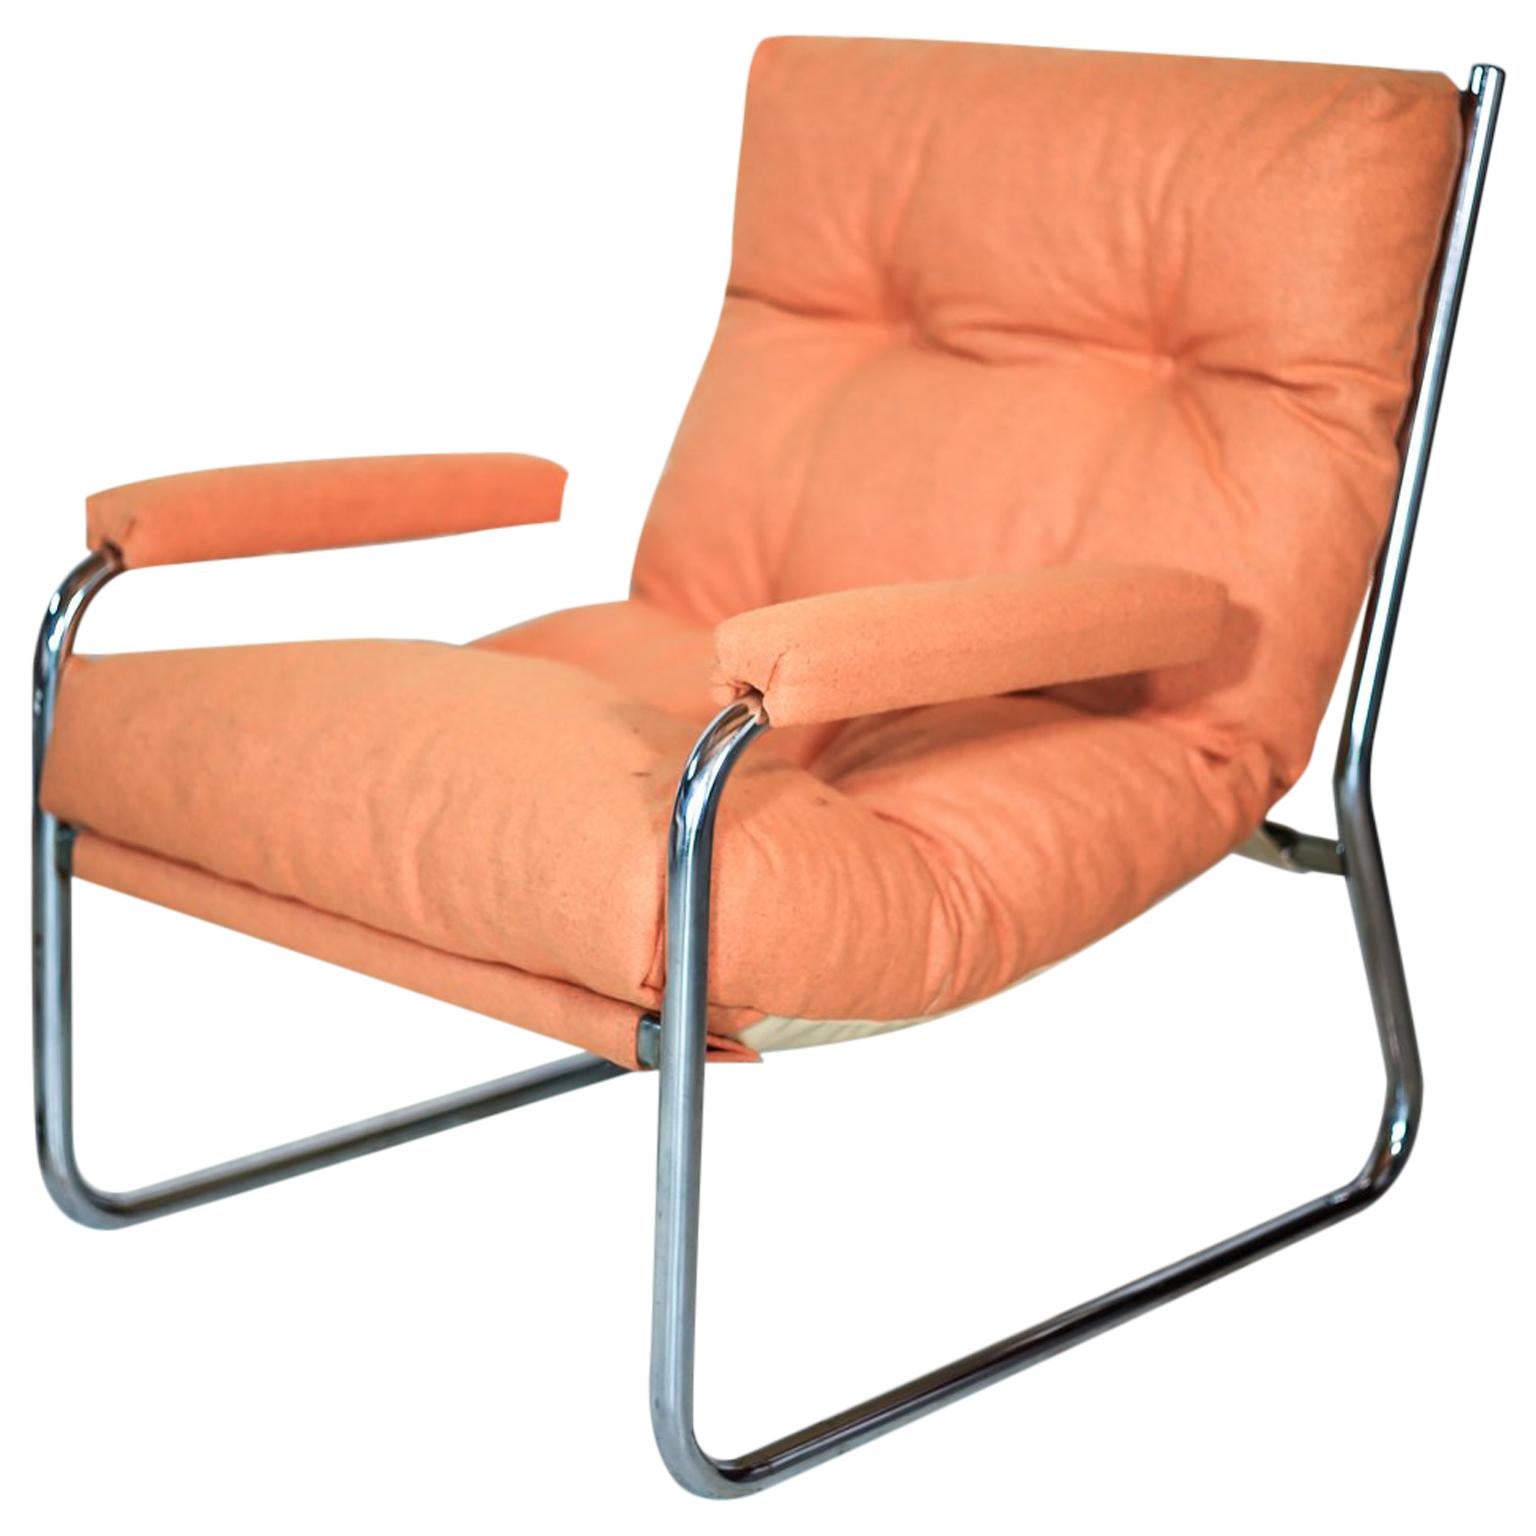 Pair of 1970s Bauhaus Style Tubular Steel Cantilever Sling Chairs - in stock For Sale